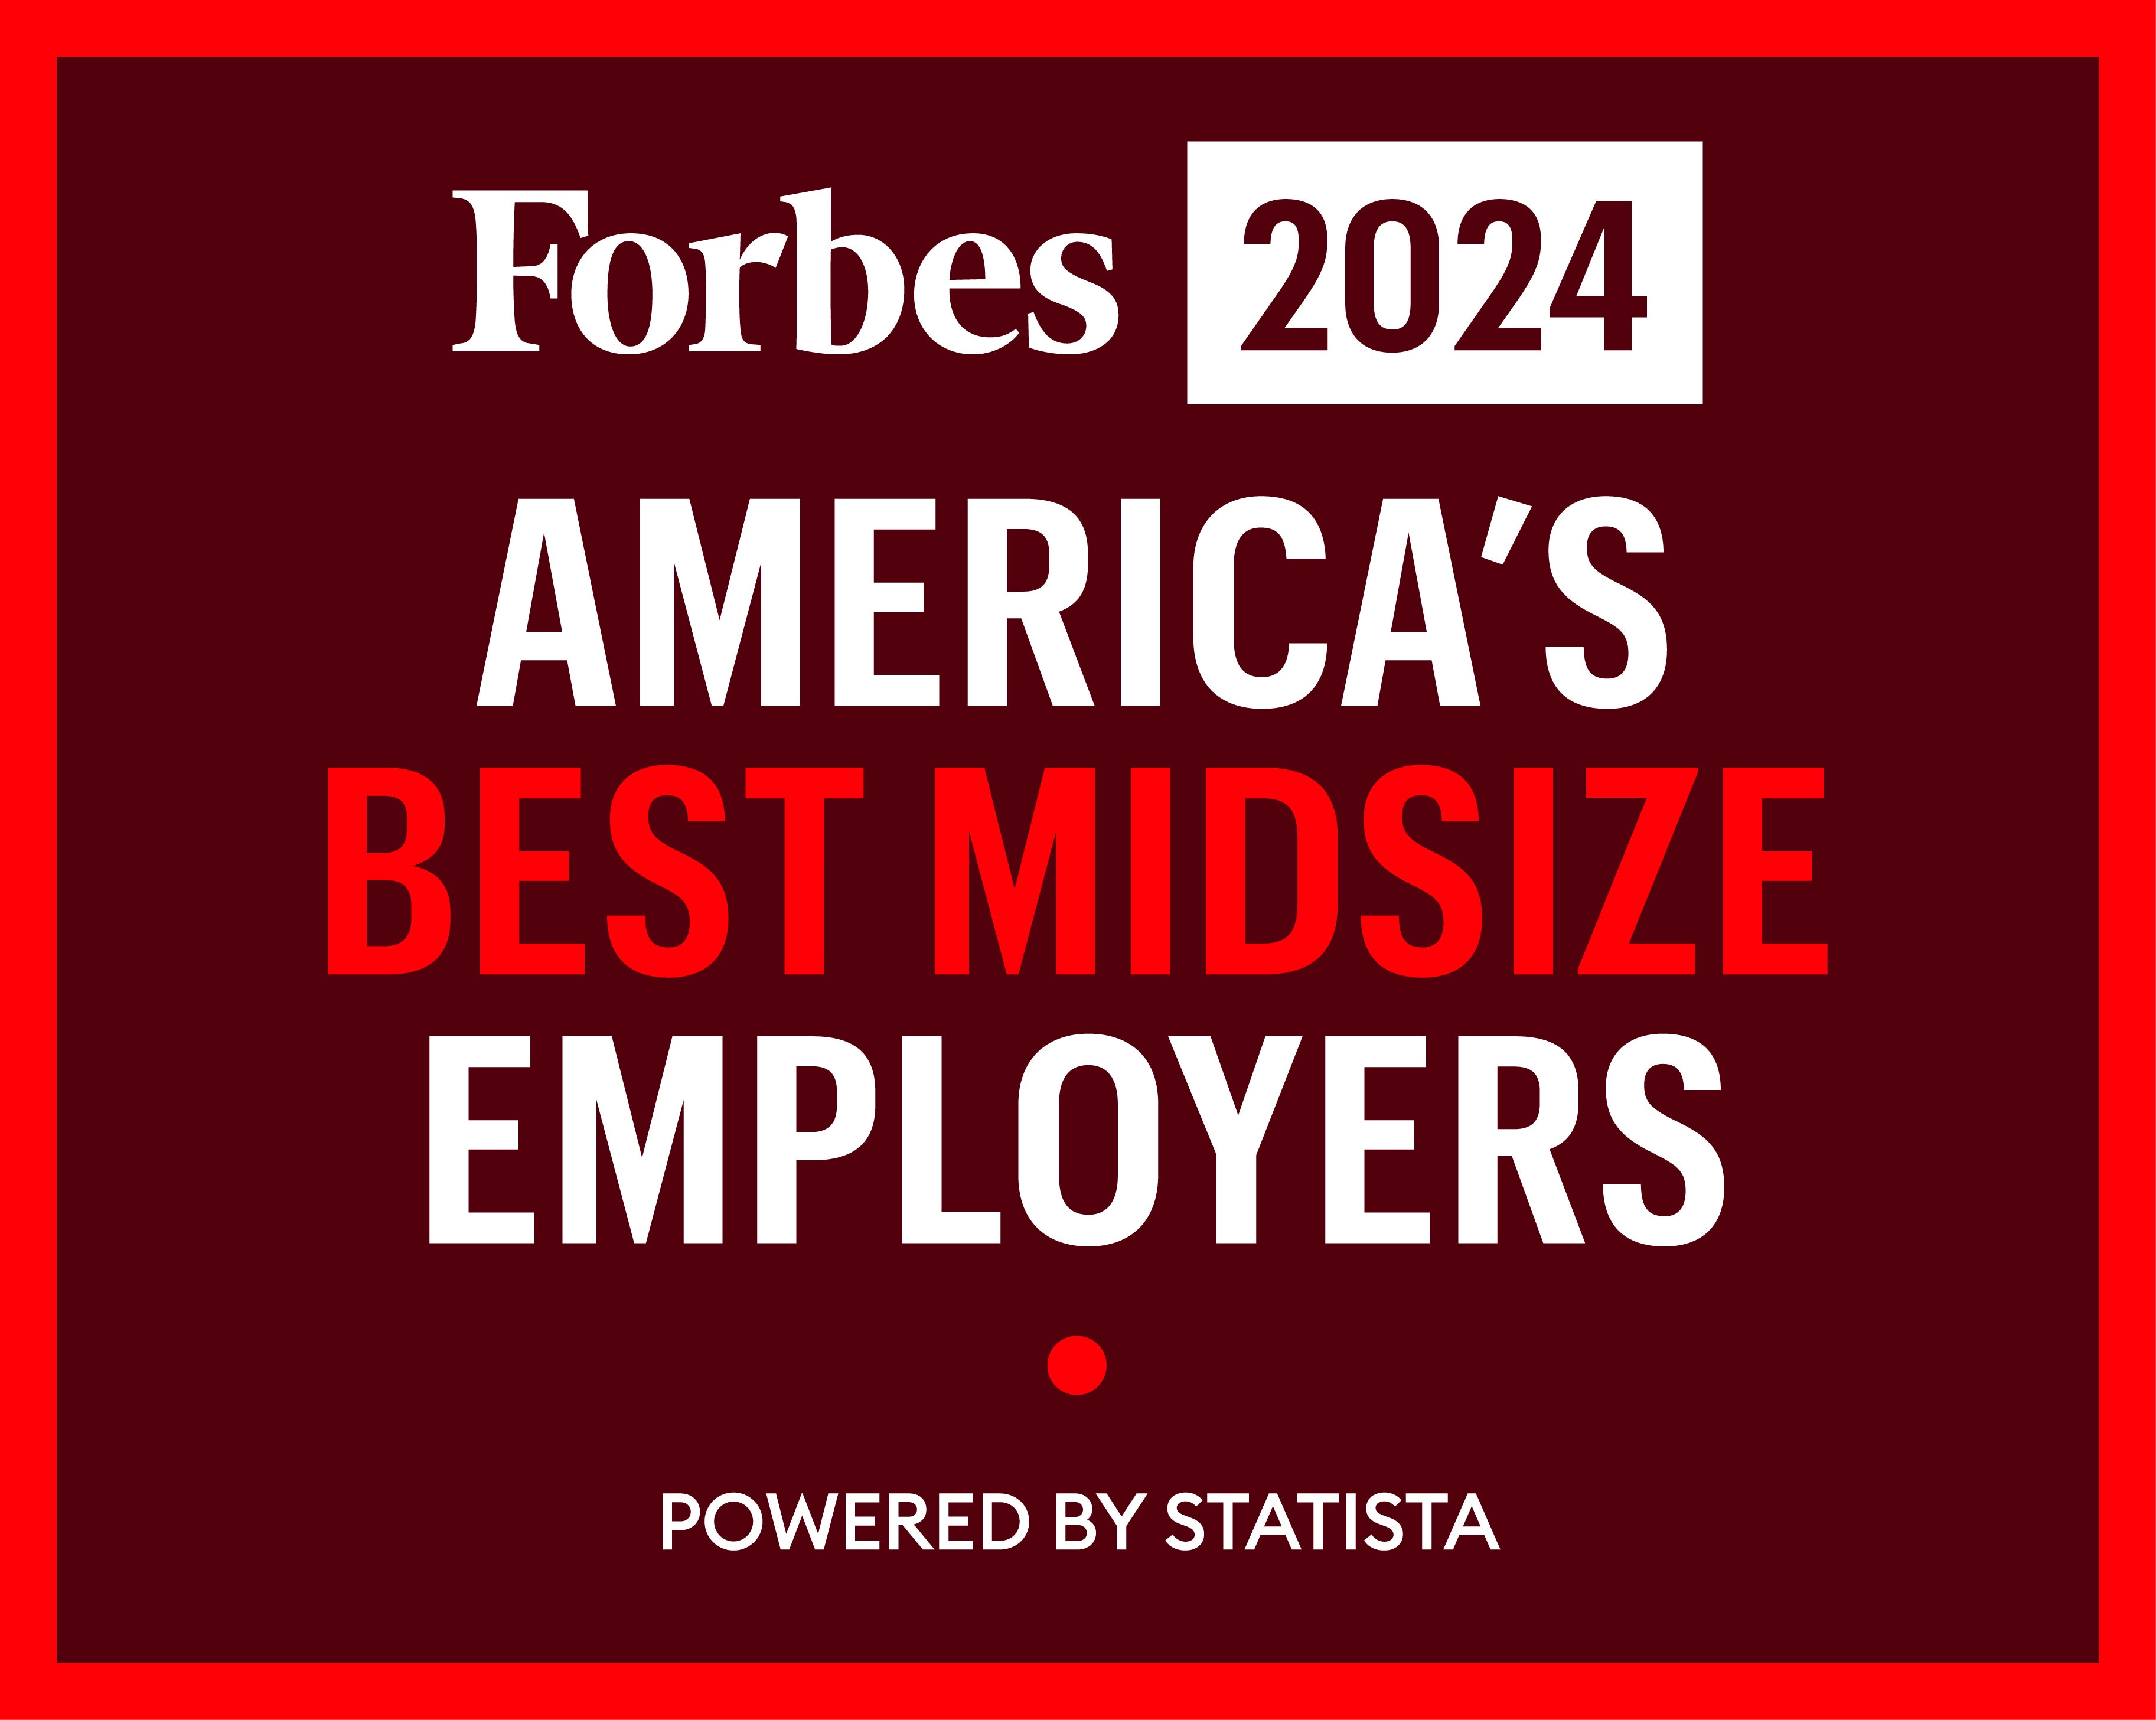 Forbes 2023 America's Best Midsize Employers